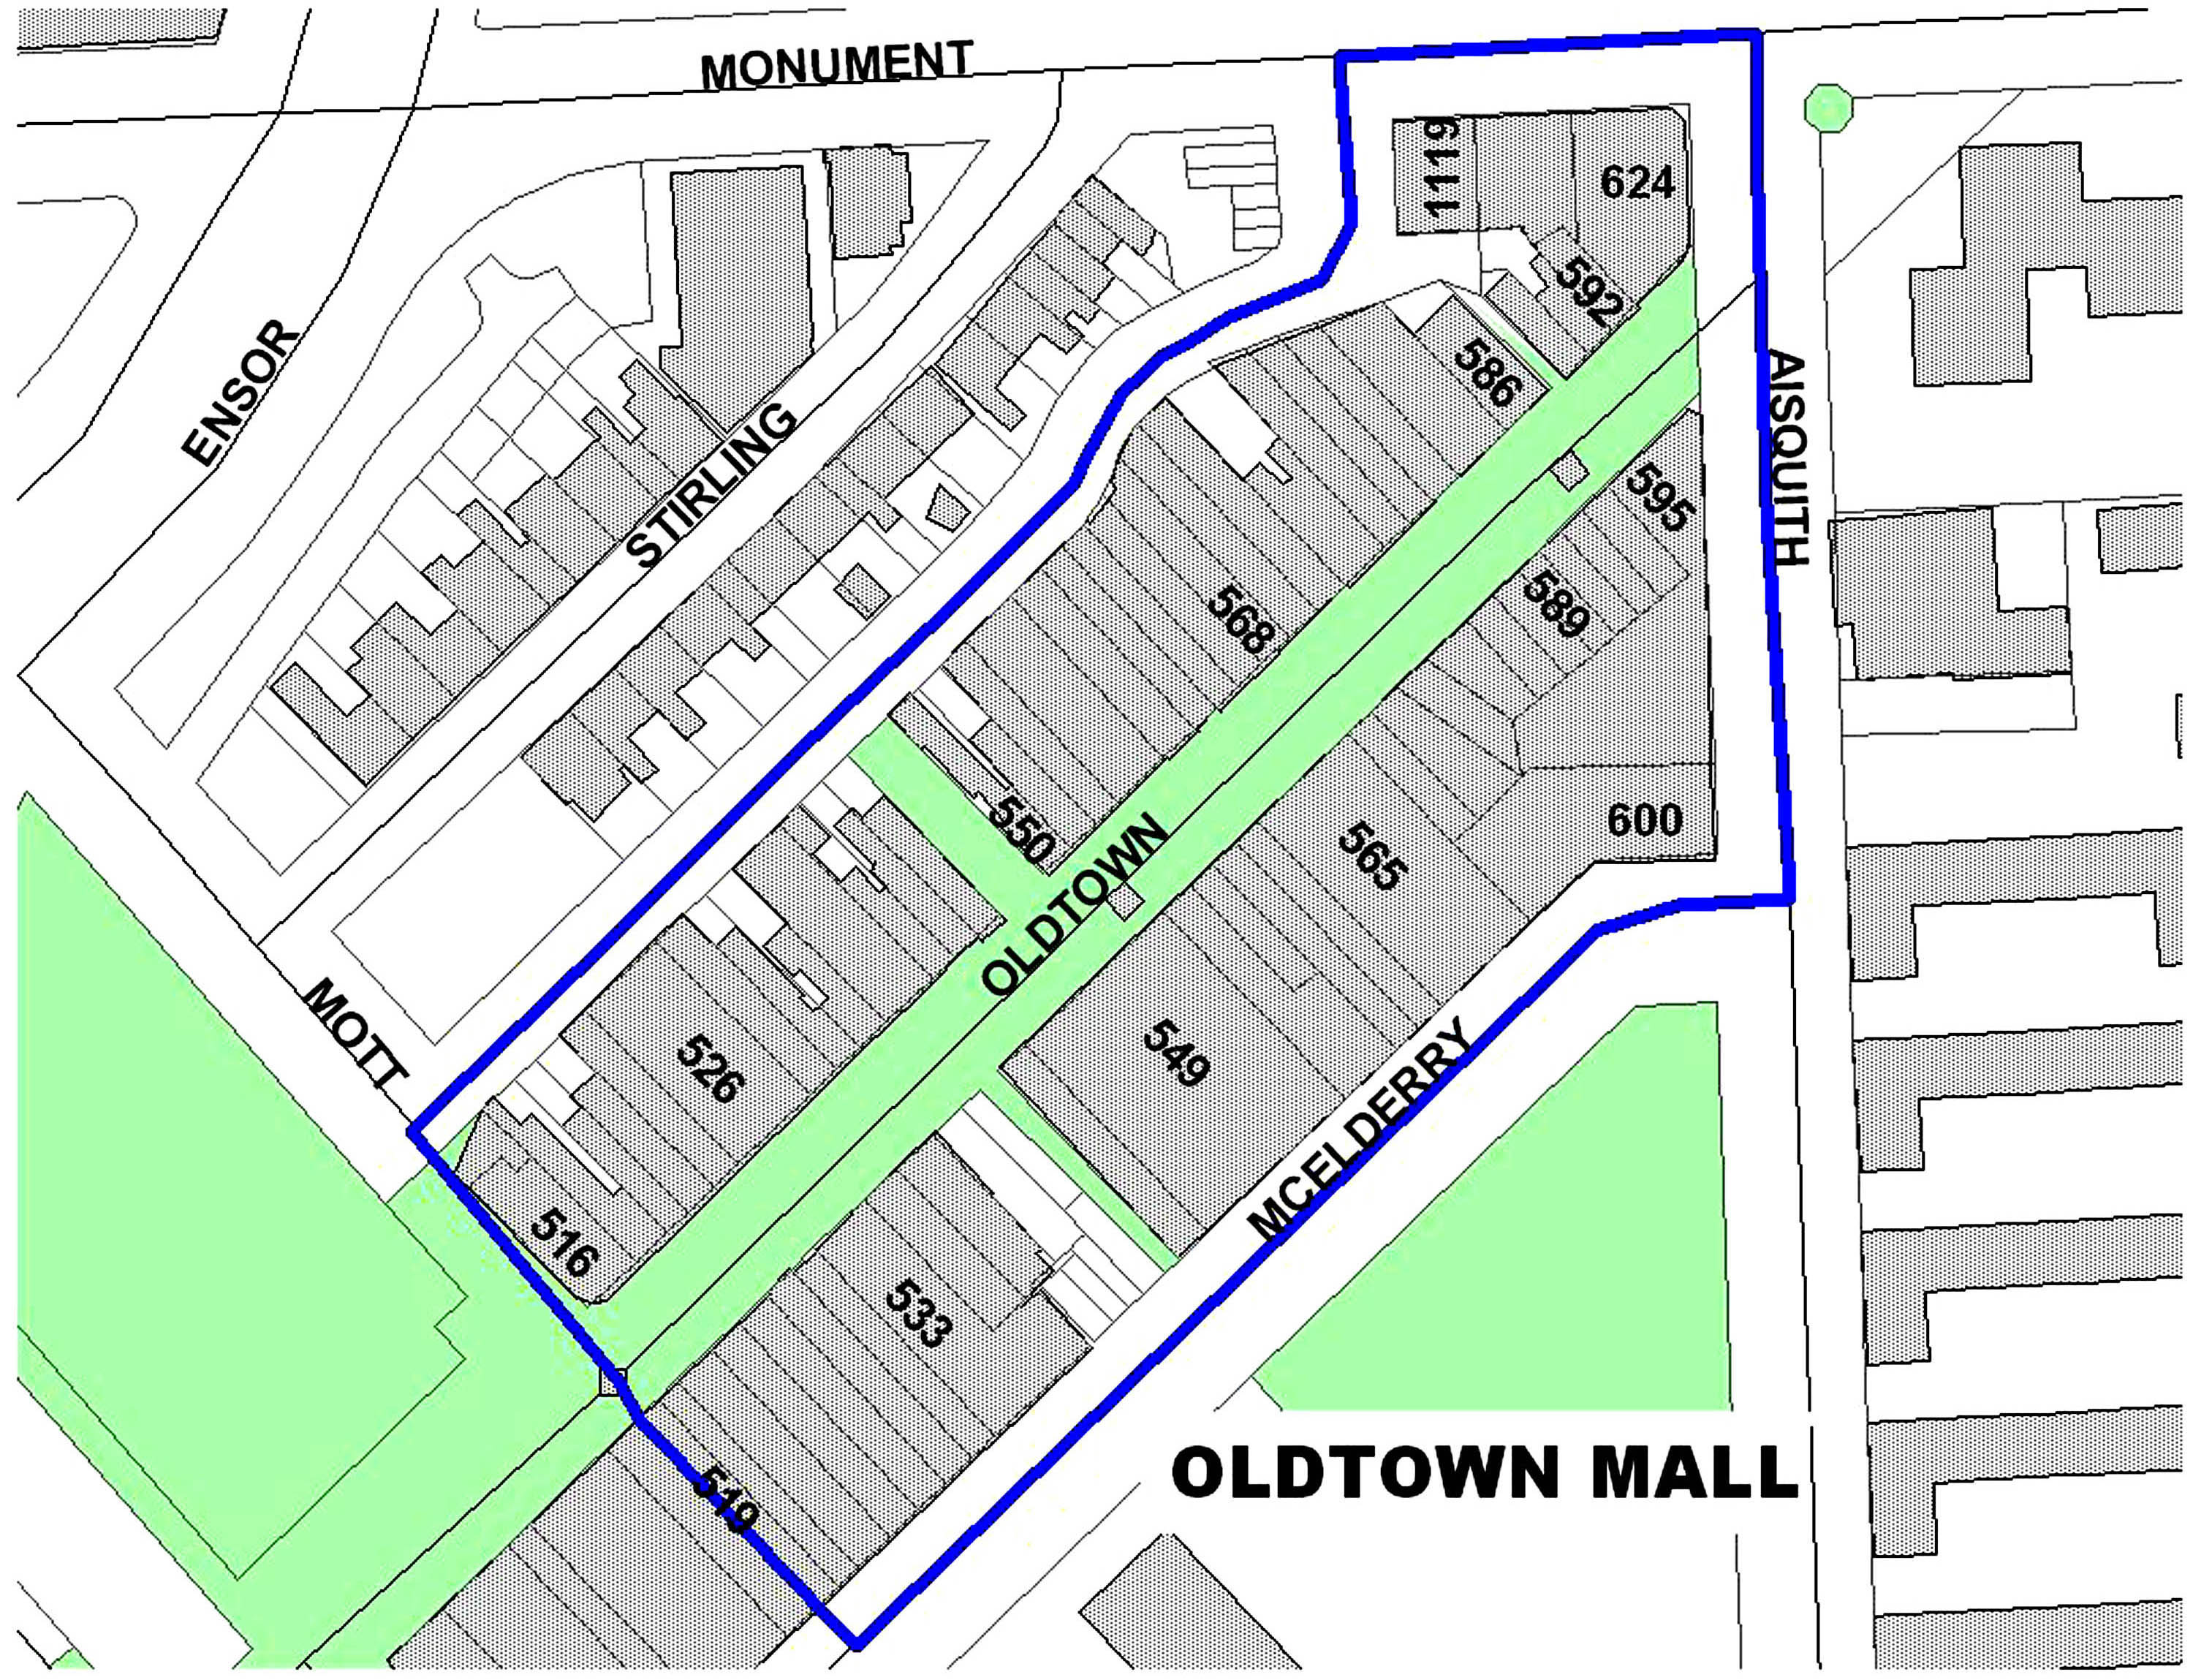 Map of the Oldtown Mall Historic District